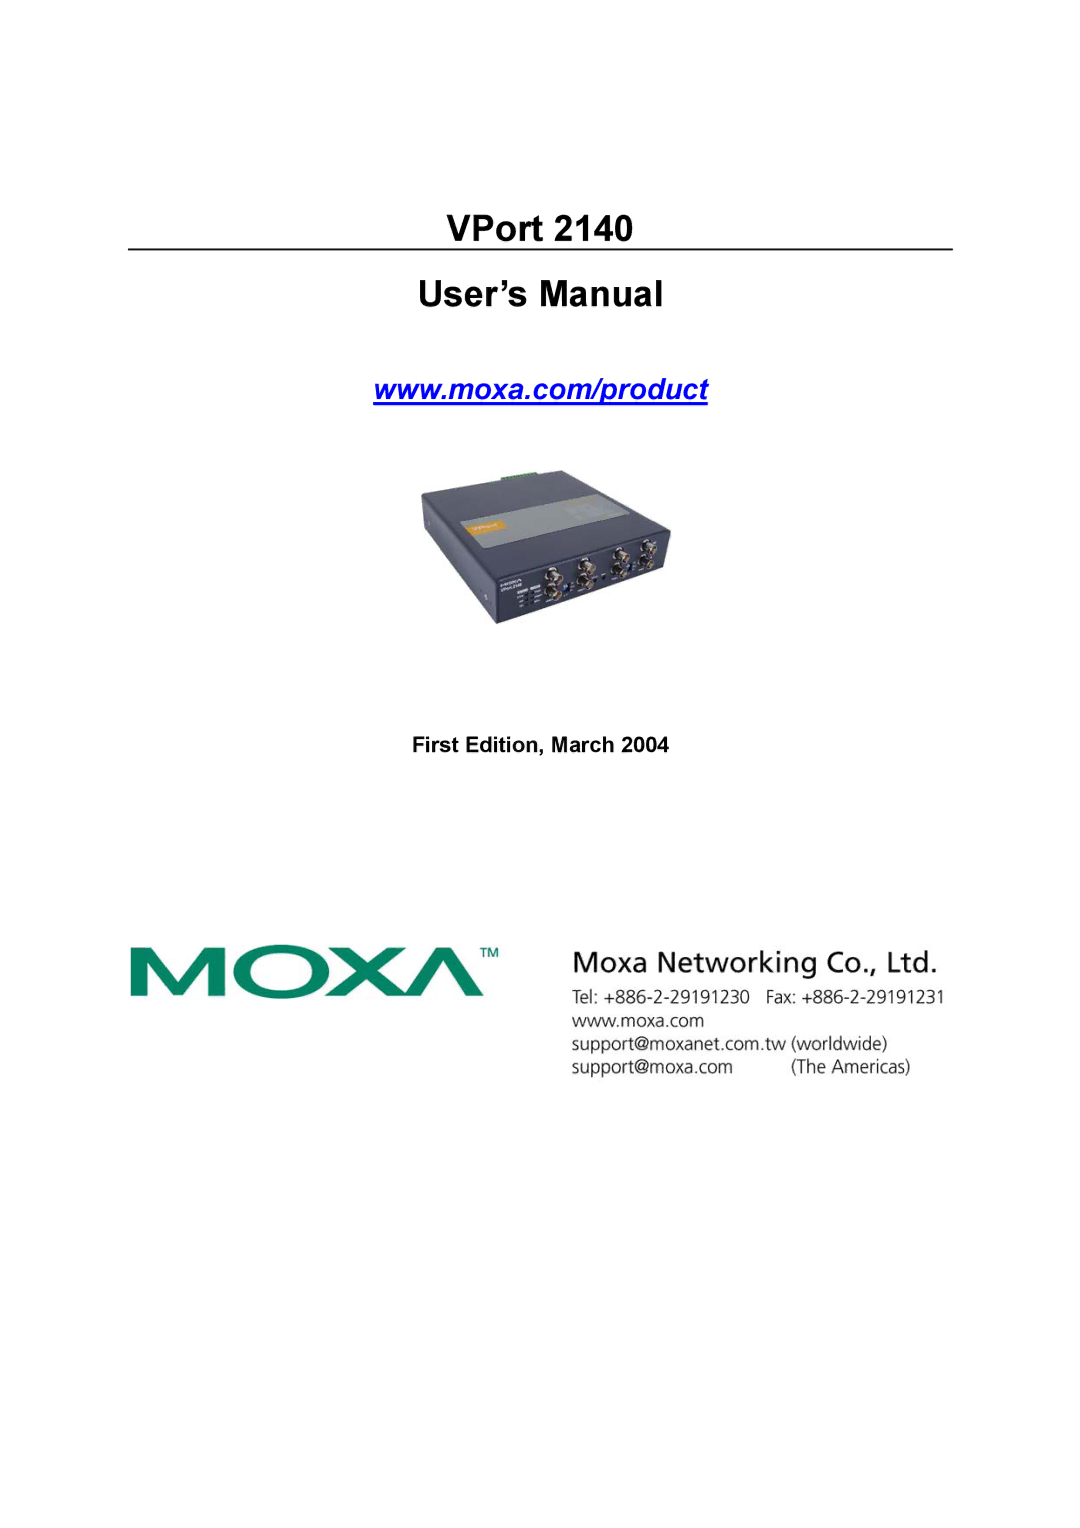 Moxa Technologies 2140 user manual VPort User’s Manual, First Edition, March 